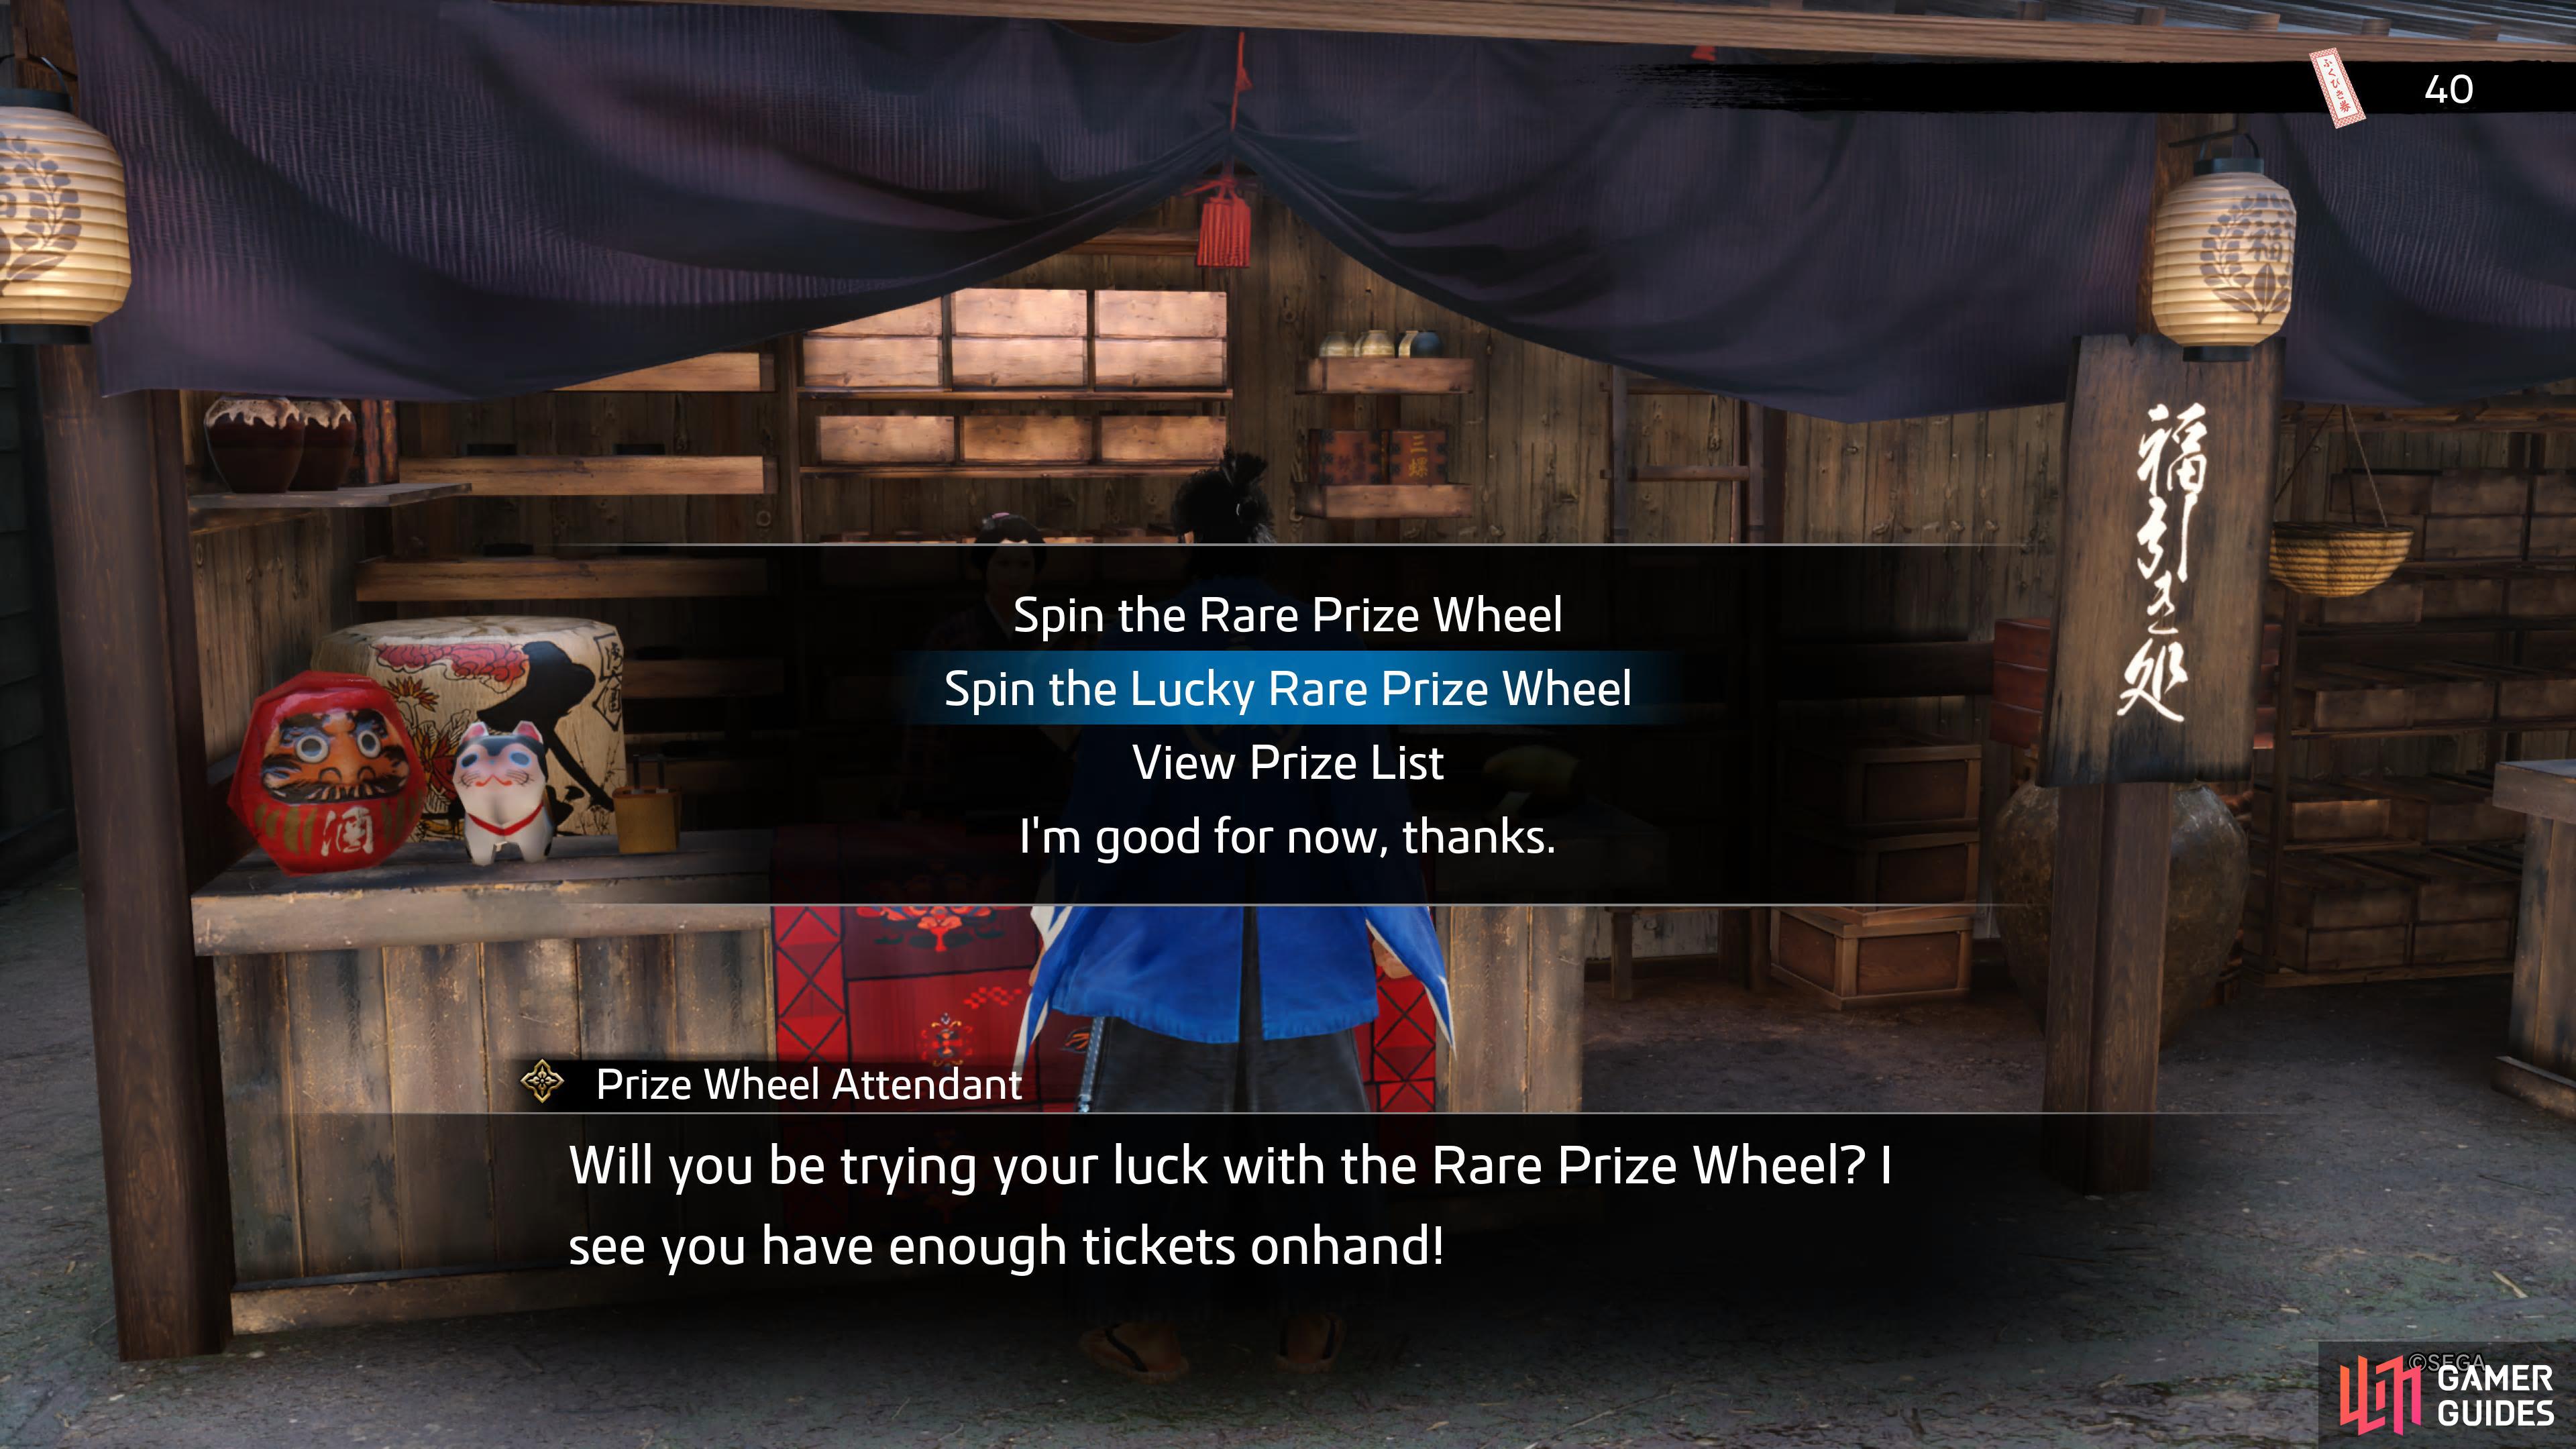 After 50 tickets have been spent in the regular prize wheel stall, a second stall will open with rarer items. This costs 5 tickets for the Rare Prize Wheel, and 10 for the Lucky Rare Prize Wheel.